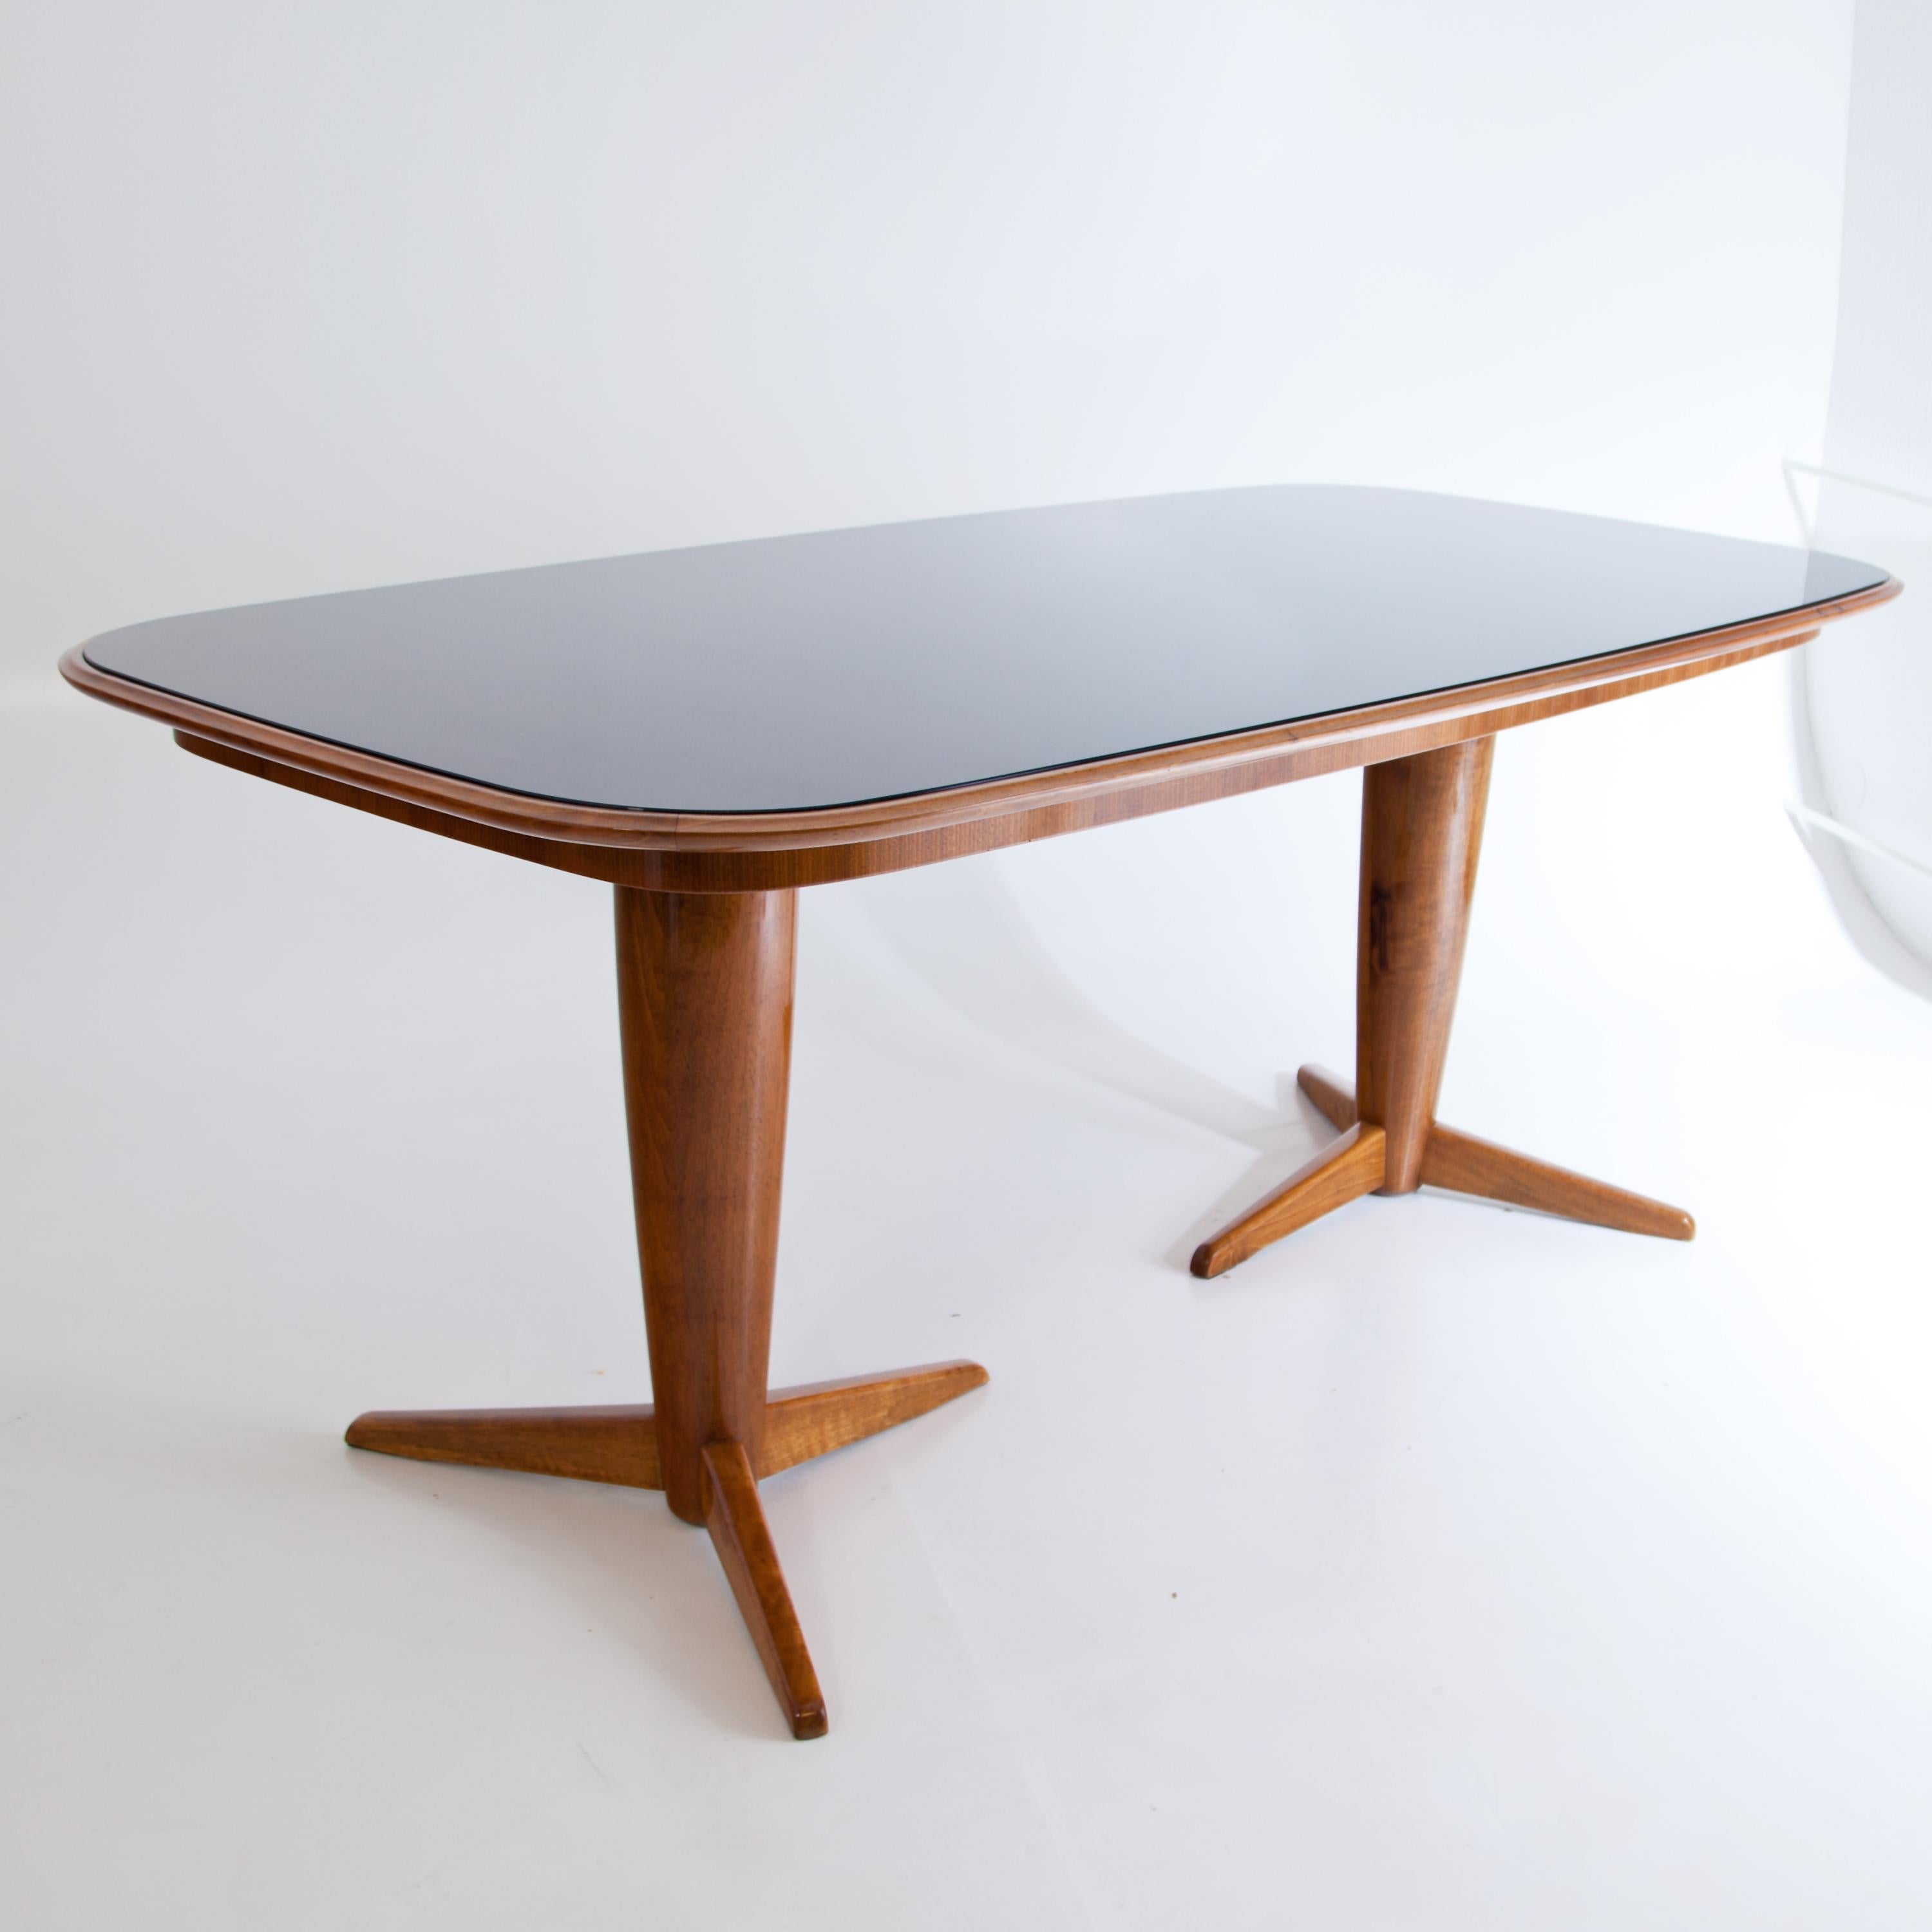 Midcentury table with rectangular table top with rounded corners. The table stands on two legs with three feet each. The table top is colored in black and covered with a glass top.